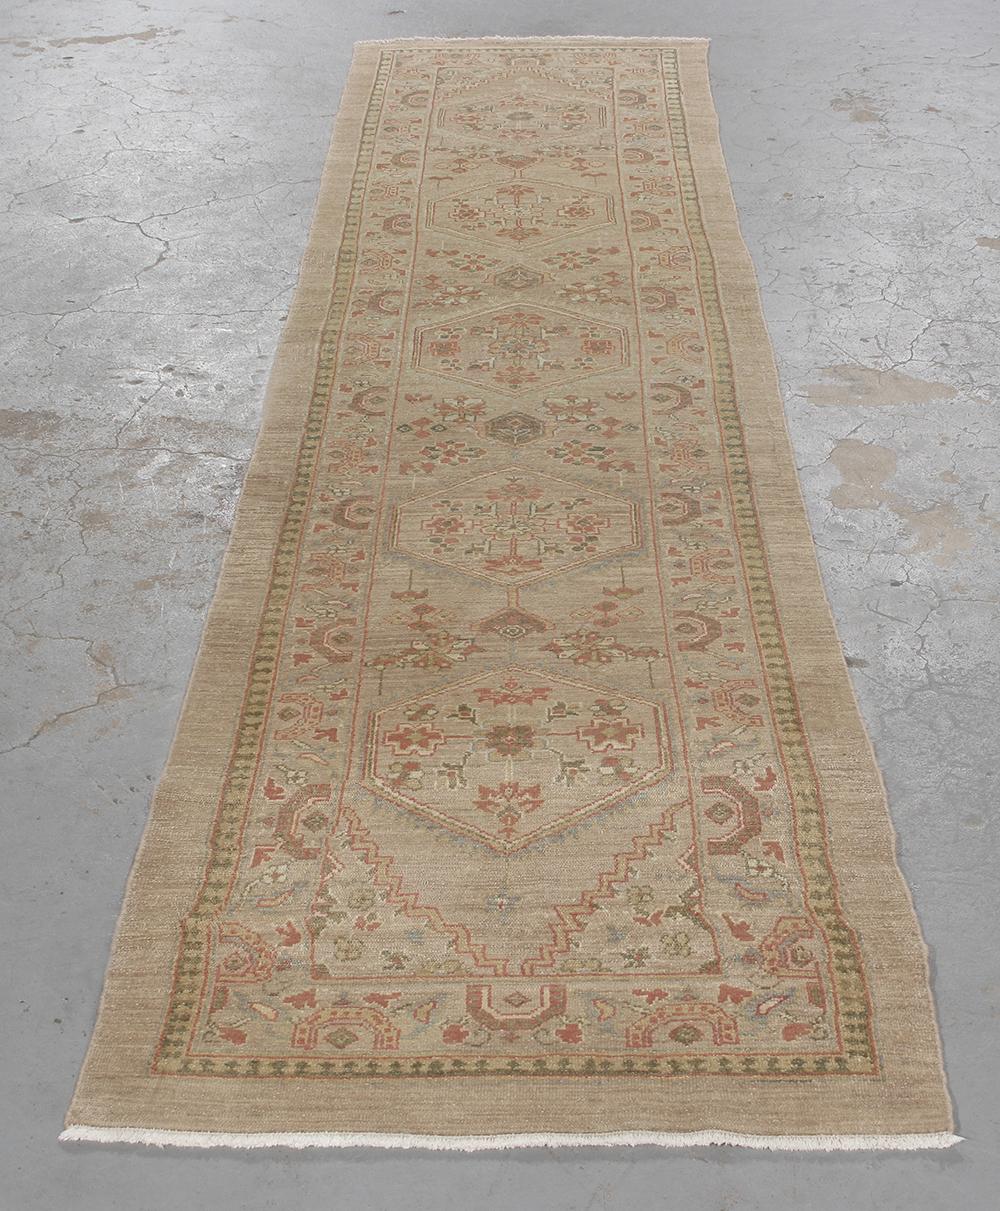 Primitive Persian Traditional Kurdish Hand-Knotted Runner in Camel, Green, Rust Colors For Sale